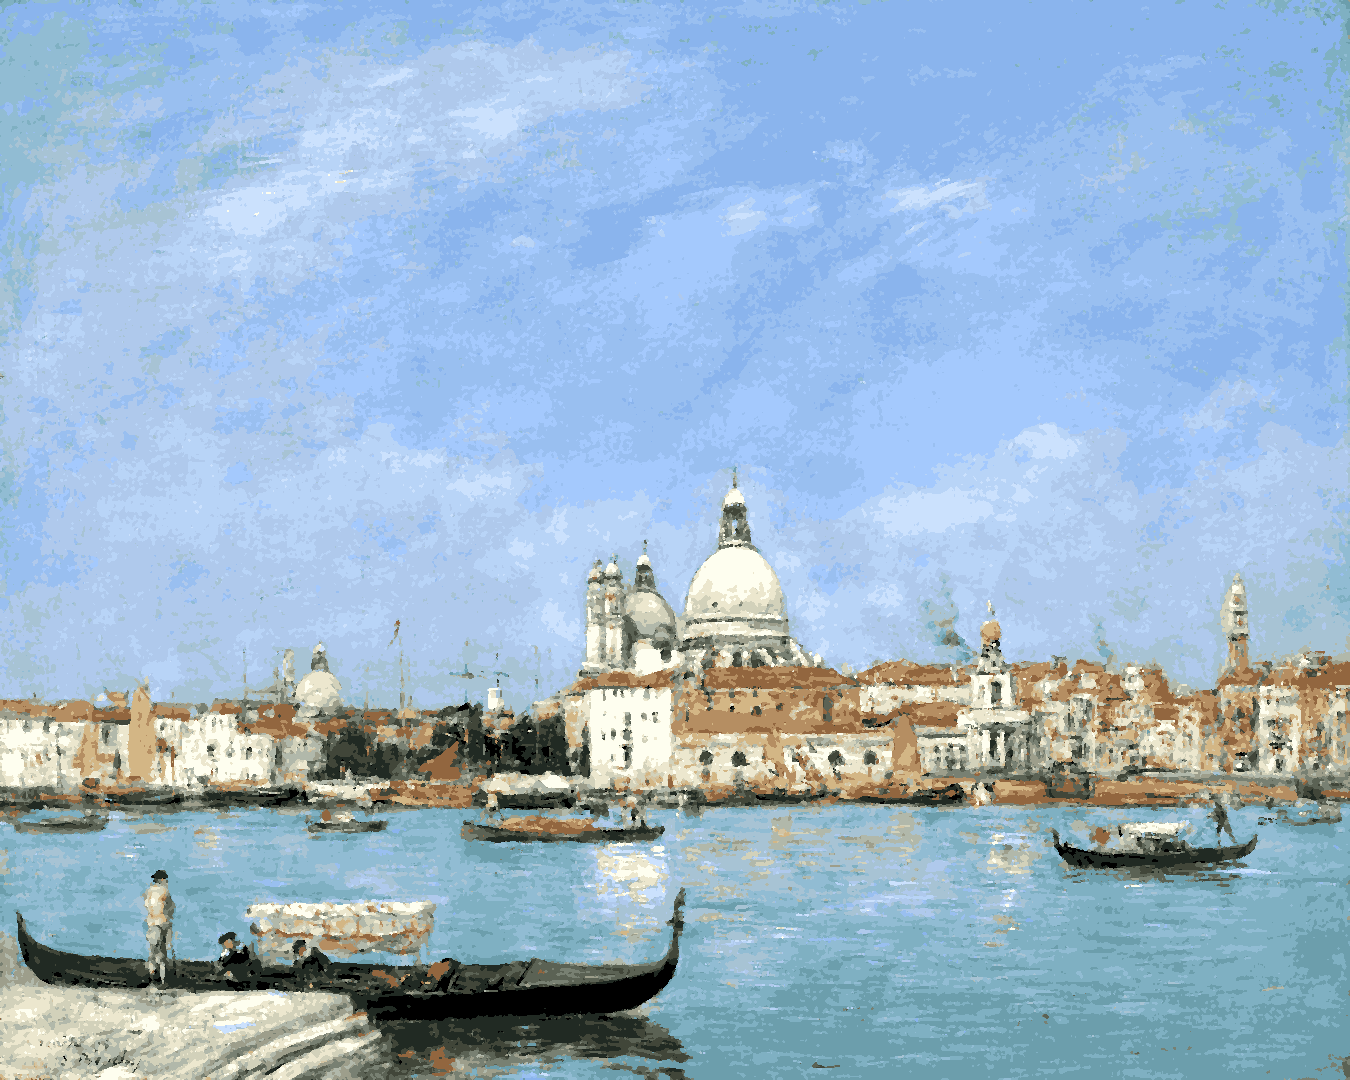 Venice, Italy Collection PD (26) - by Eugène Louis Boudin - Van-Go Paint-By-Number Kit